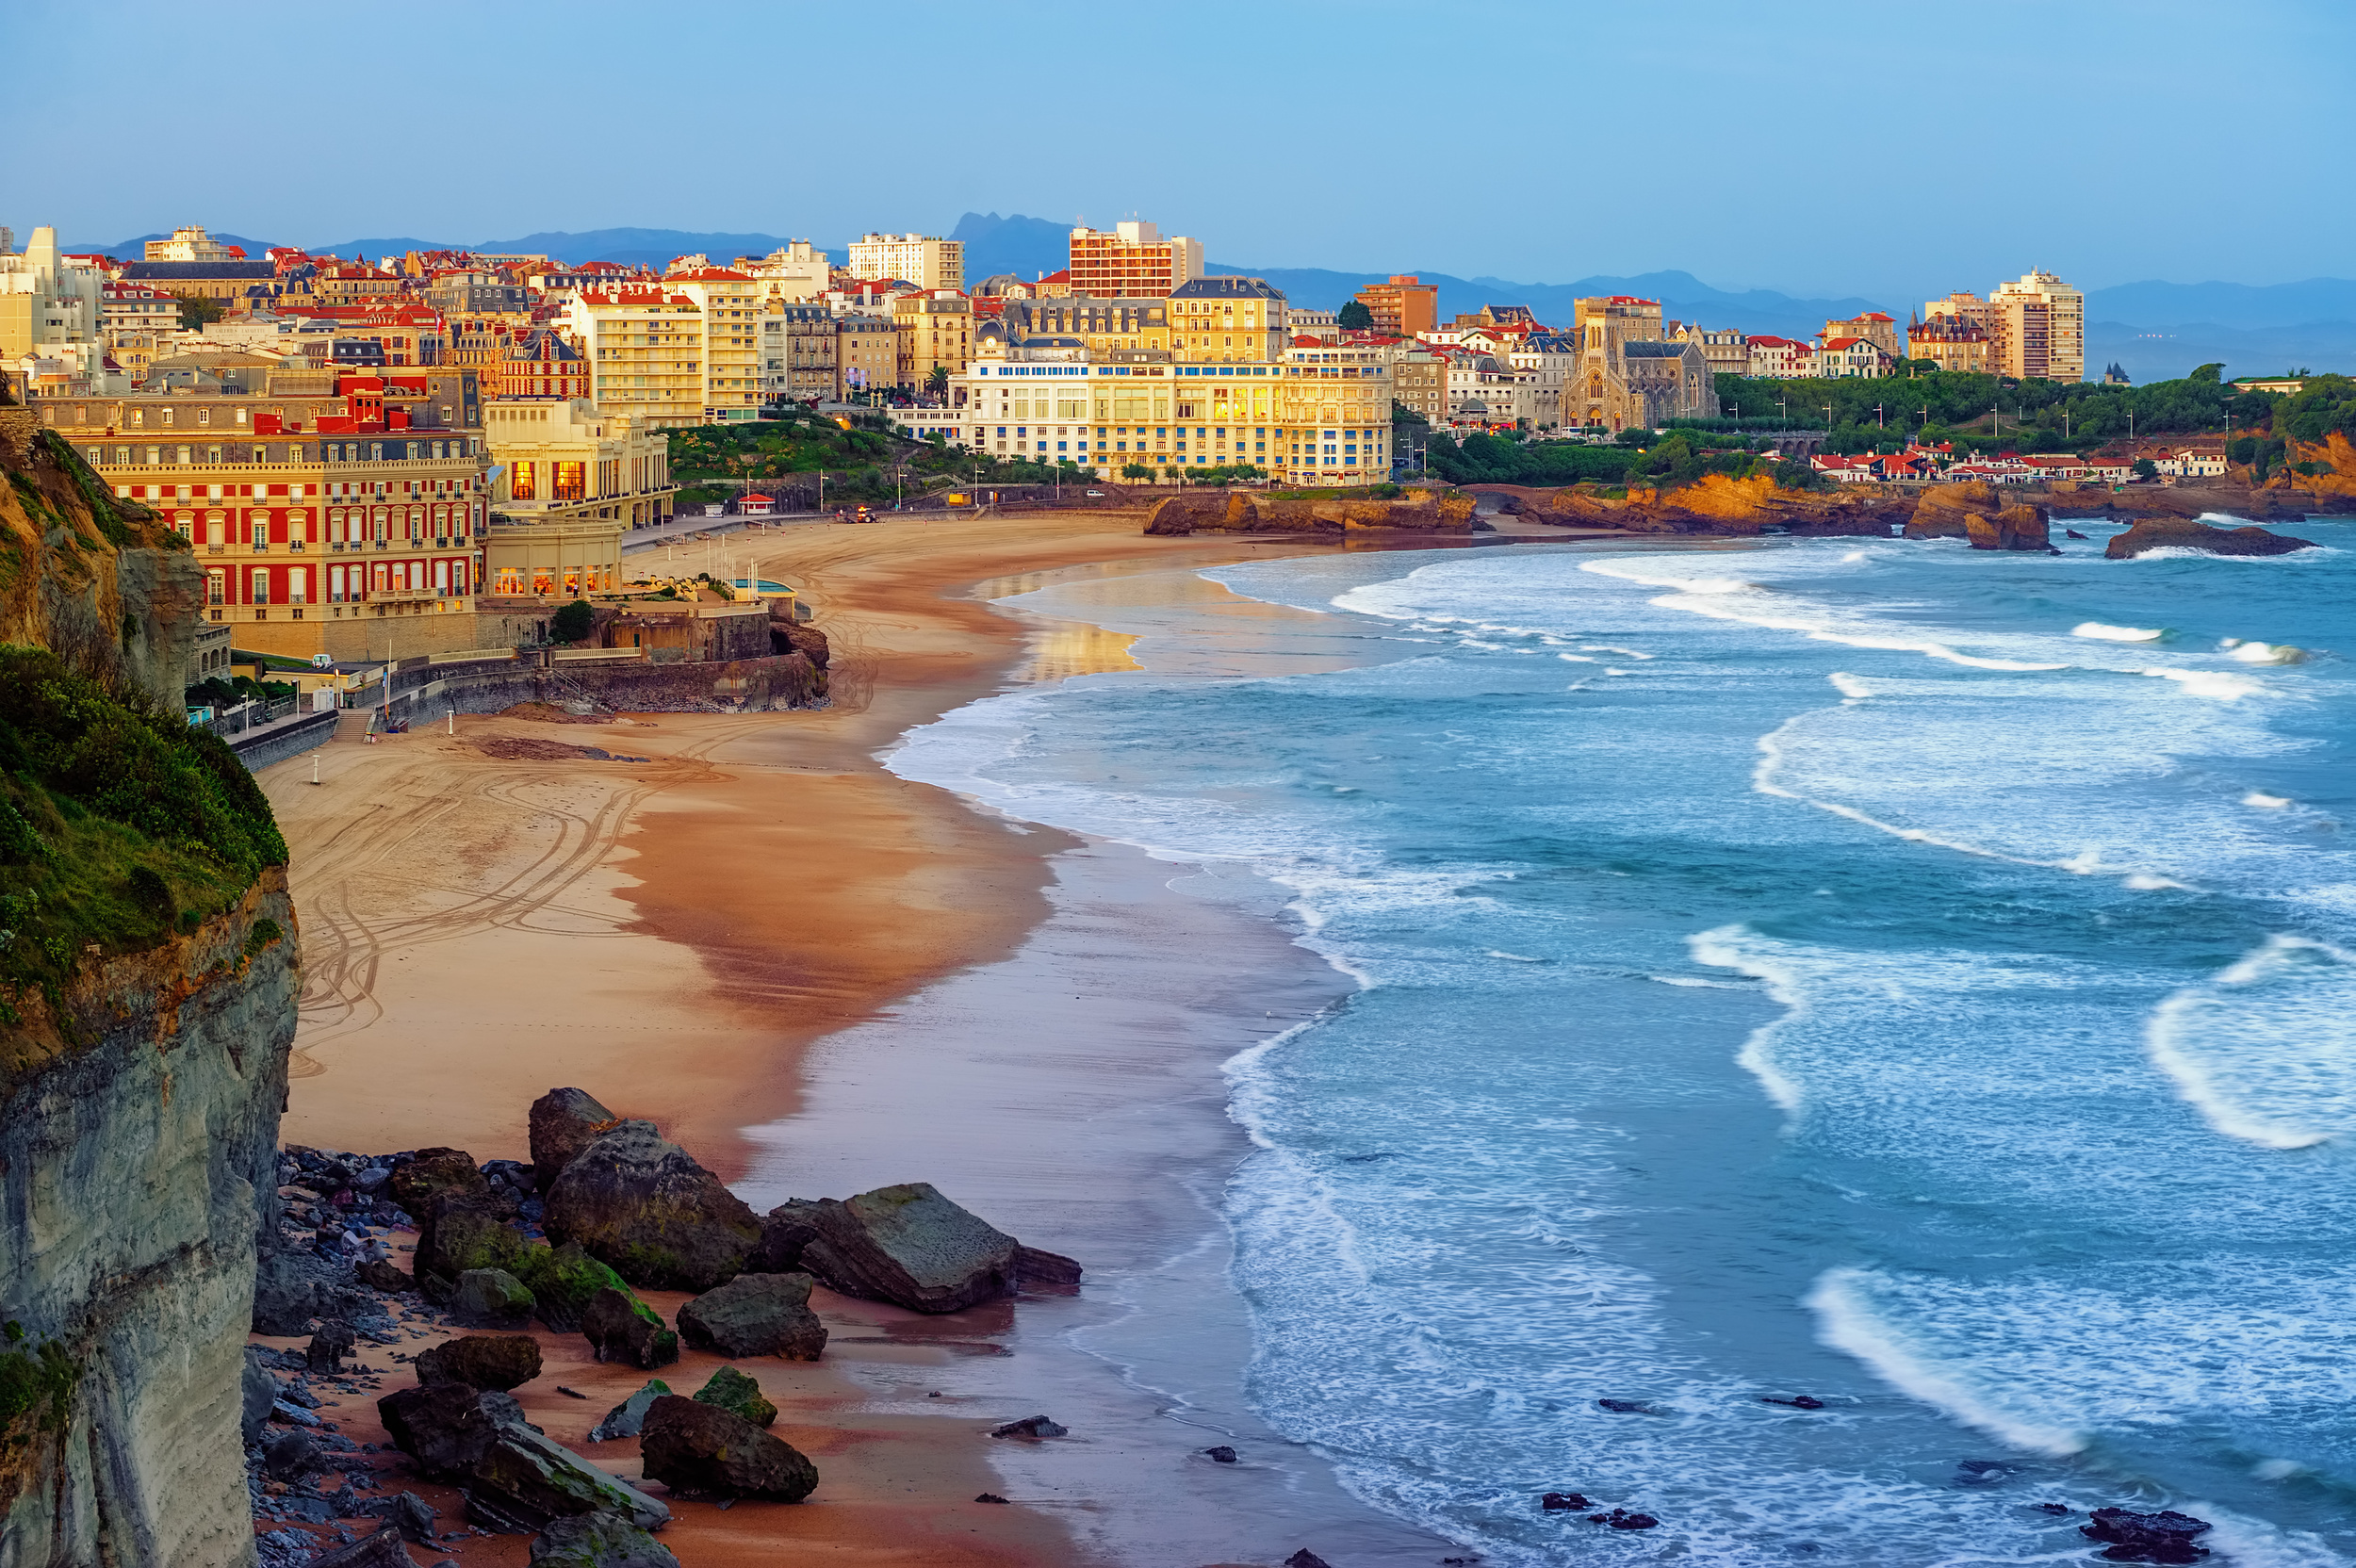 <p>Another gem in the southwest of France, Béziers is an up-and-coming destination popular with surfers. The waves here are some of the best in the country, particularly for beginners.</p><p>You may also like: <a href='https://www.yardbarker.com/lifestyle/articles/20_egg_cellent_egg_myths_you_probably_still_believe_021324/s1__23538598'>20 egg-cellent egg myths you probably still believe</a></p>